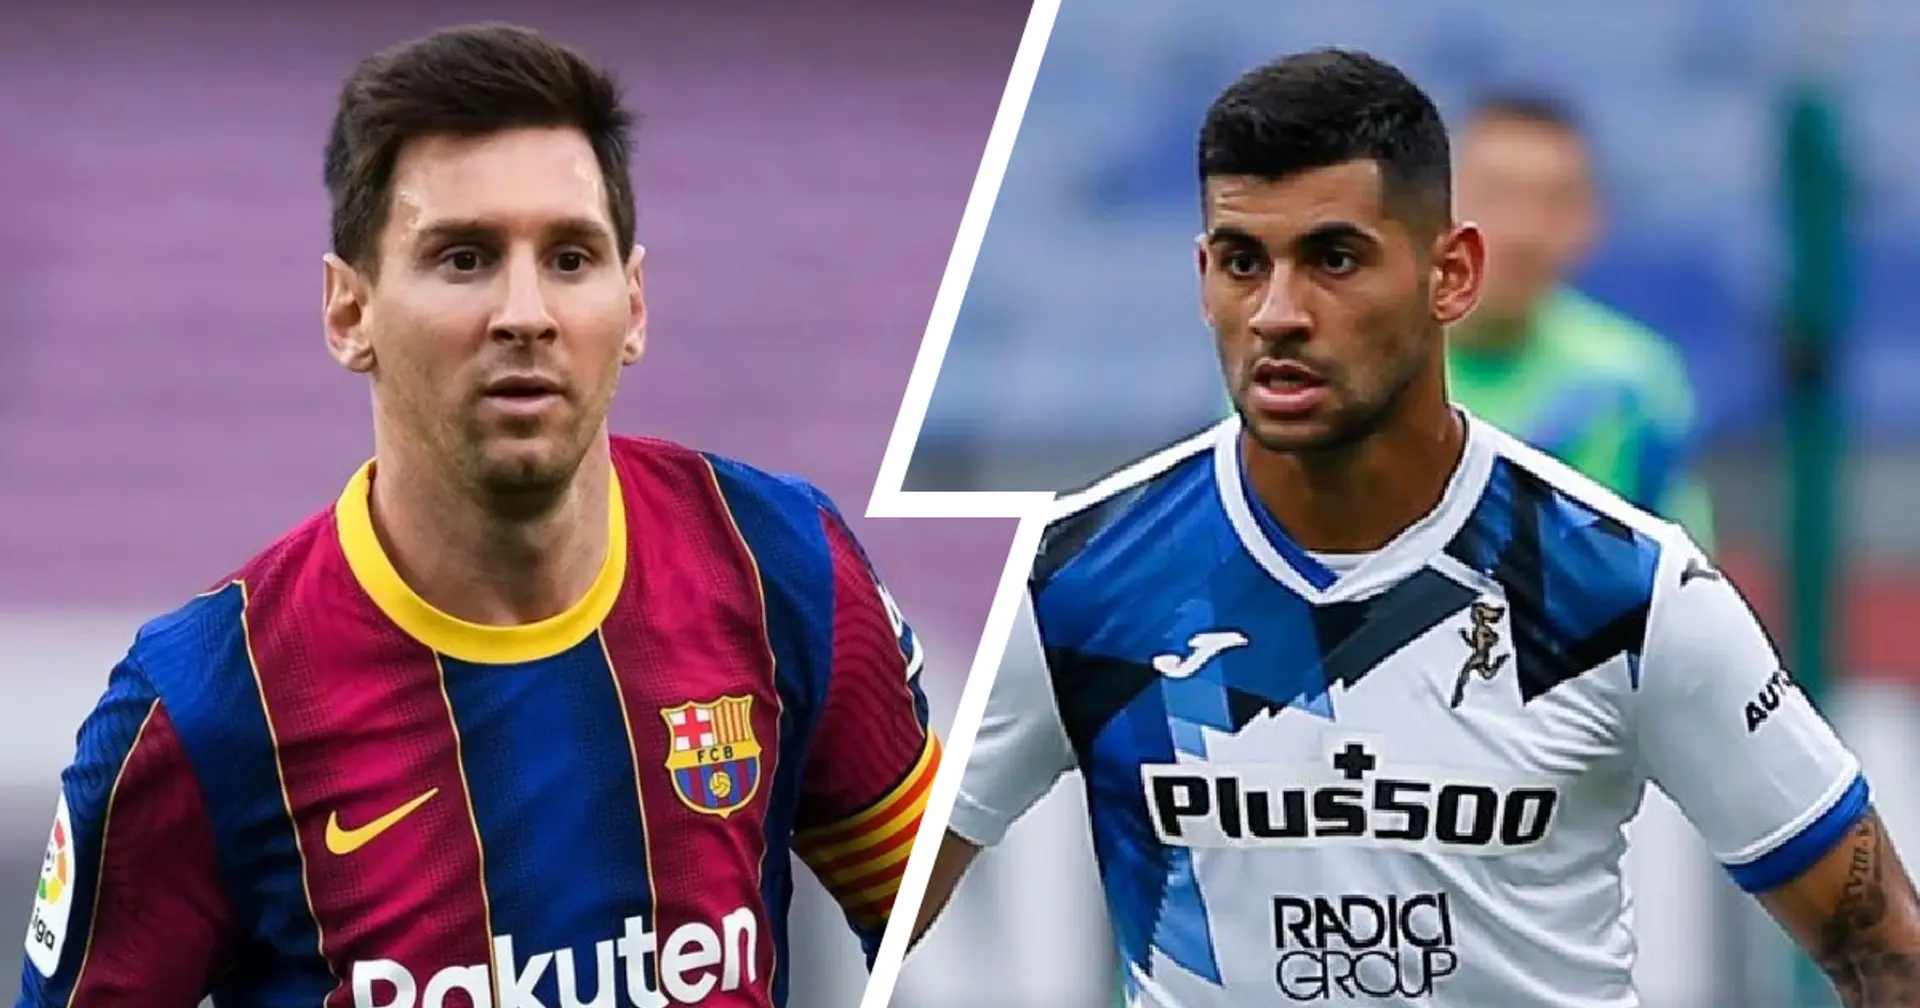 Lionel Messi, Romero & more: 11 names in Barca's transfer round-up with probability ratings